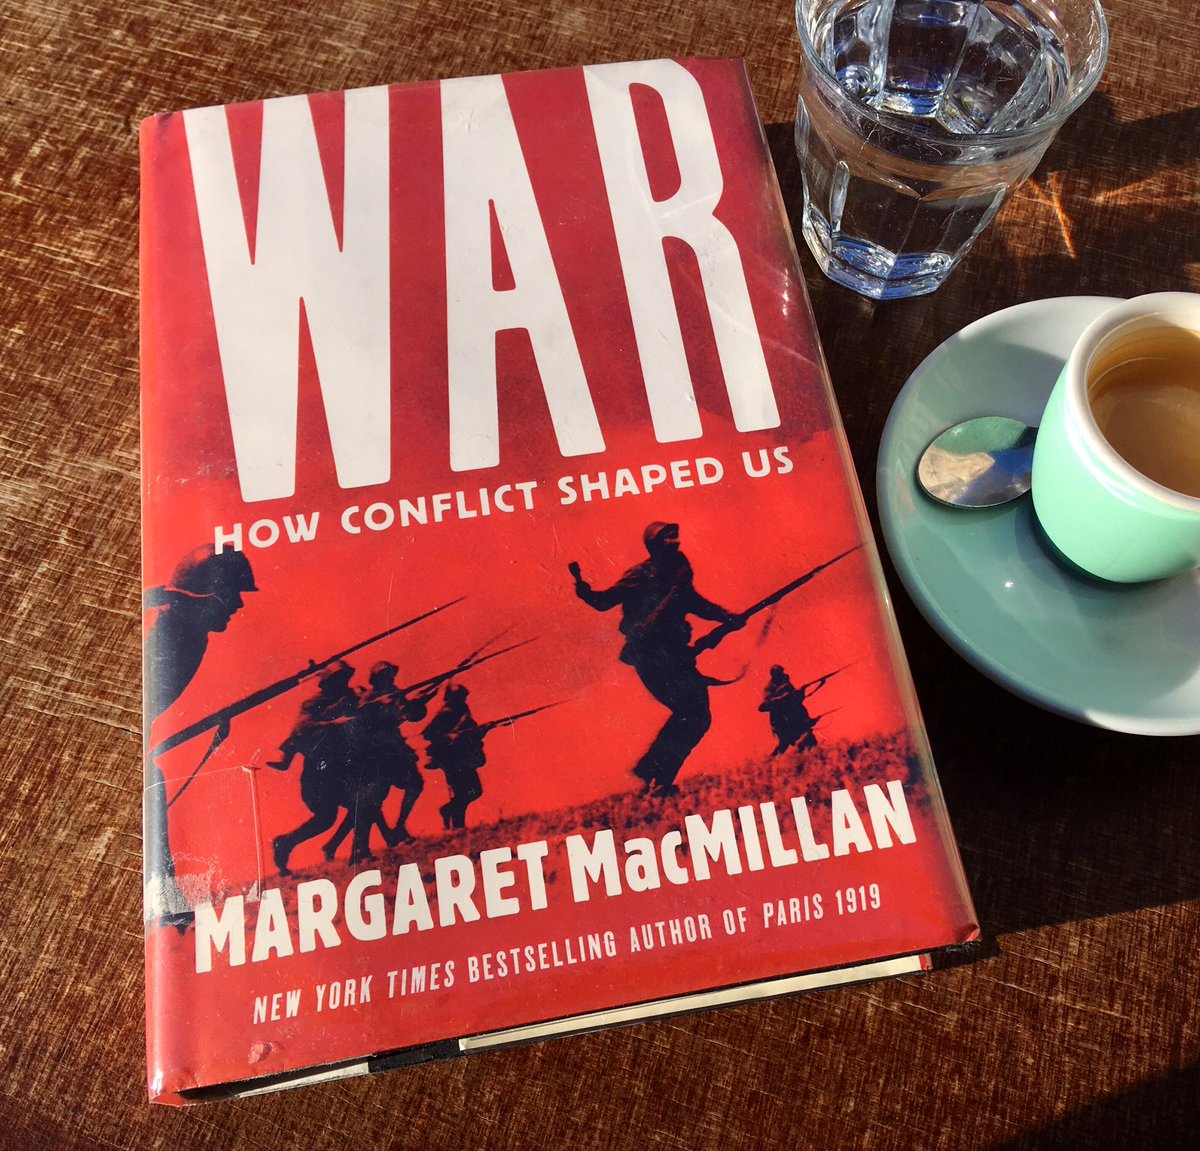 Last week I borrowed this from the library, not imagining how relevant in would become. I’m reading the great #MargaretMacMillan’s War – How Conflict Shapes Us. #petipawreads